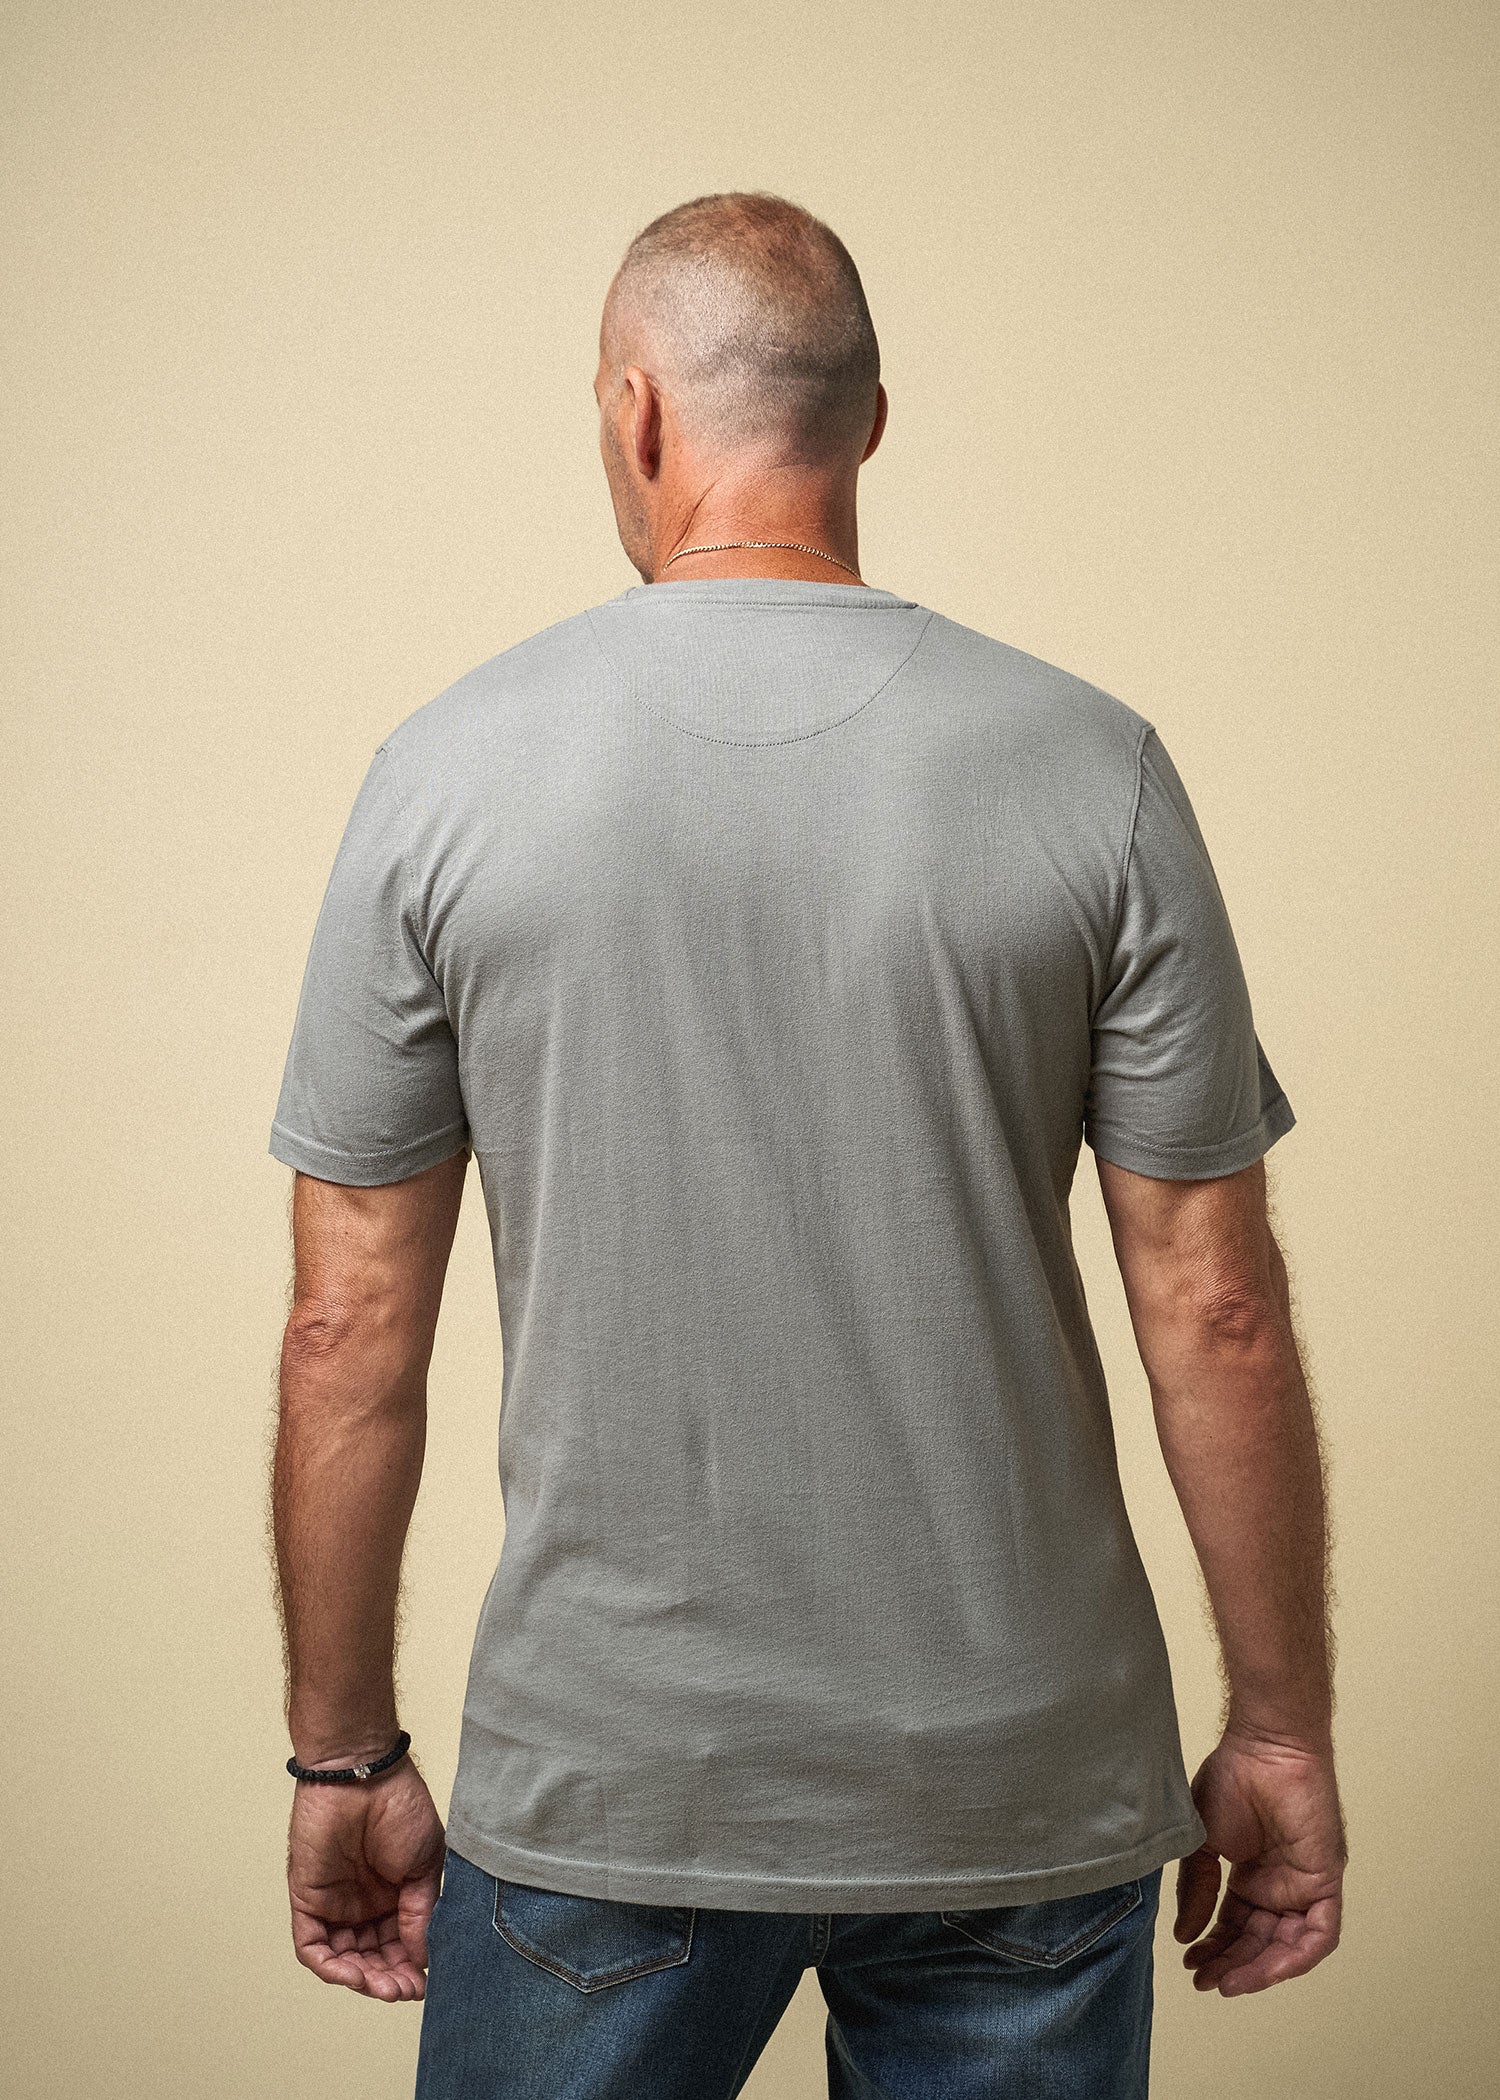 Men's Tall Crew Neck Tee in Pewter